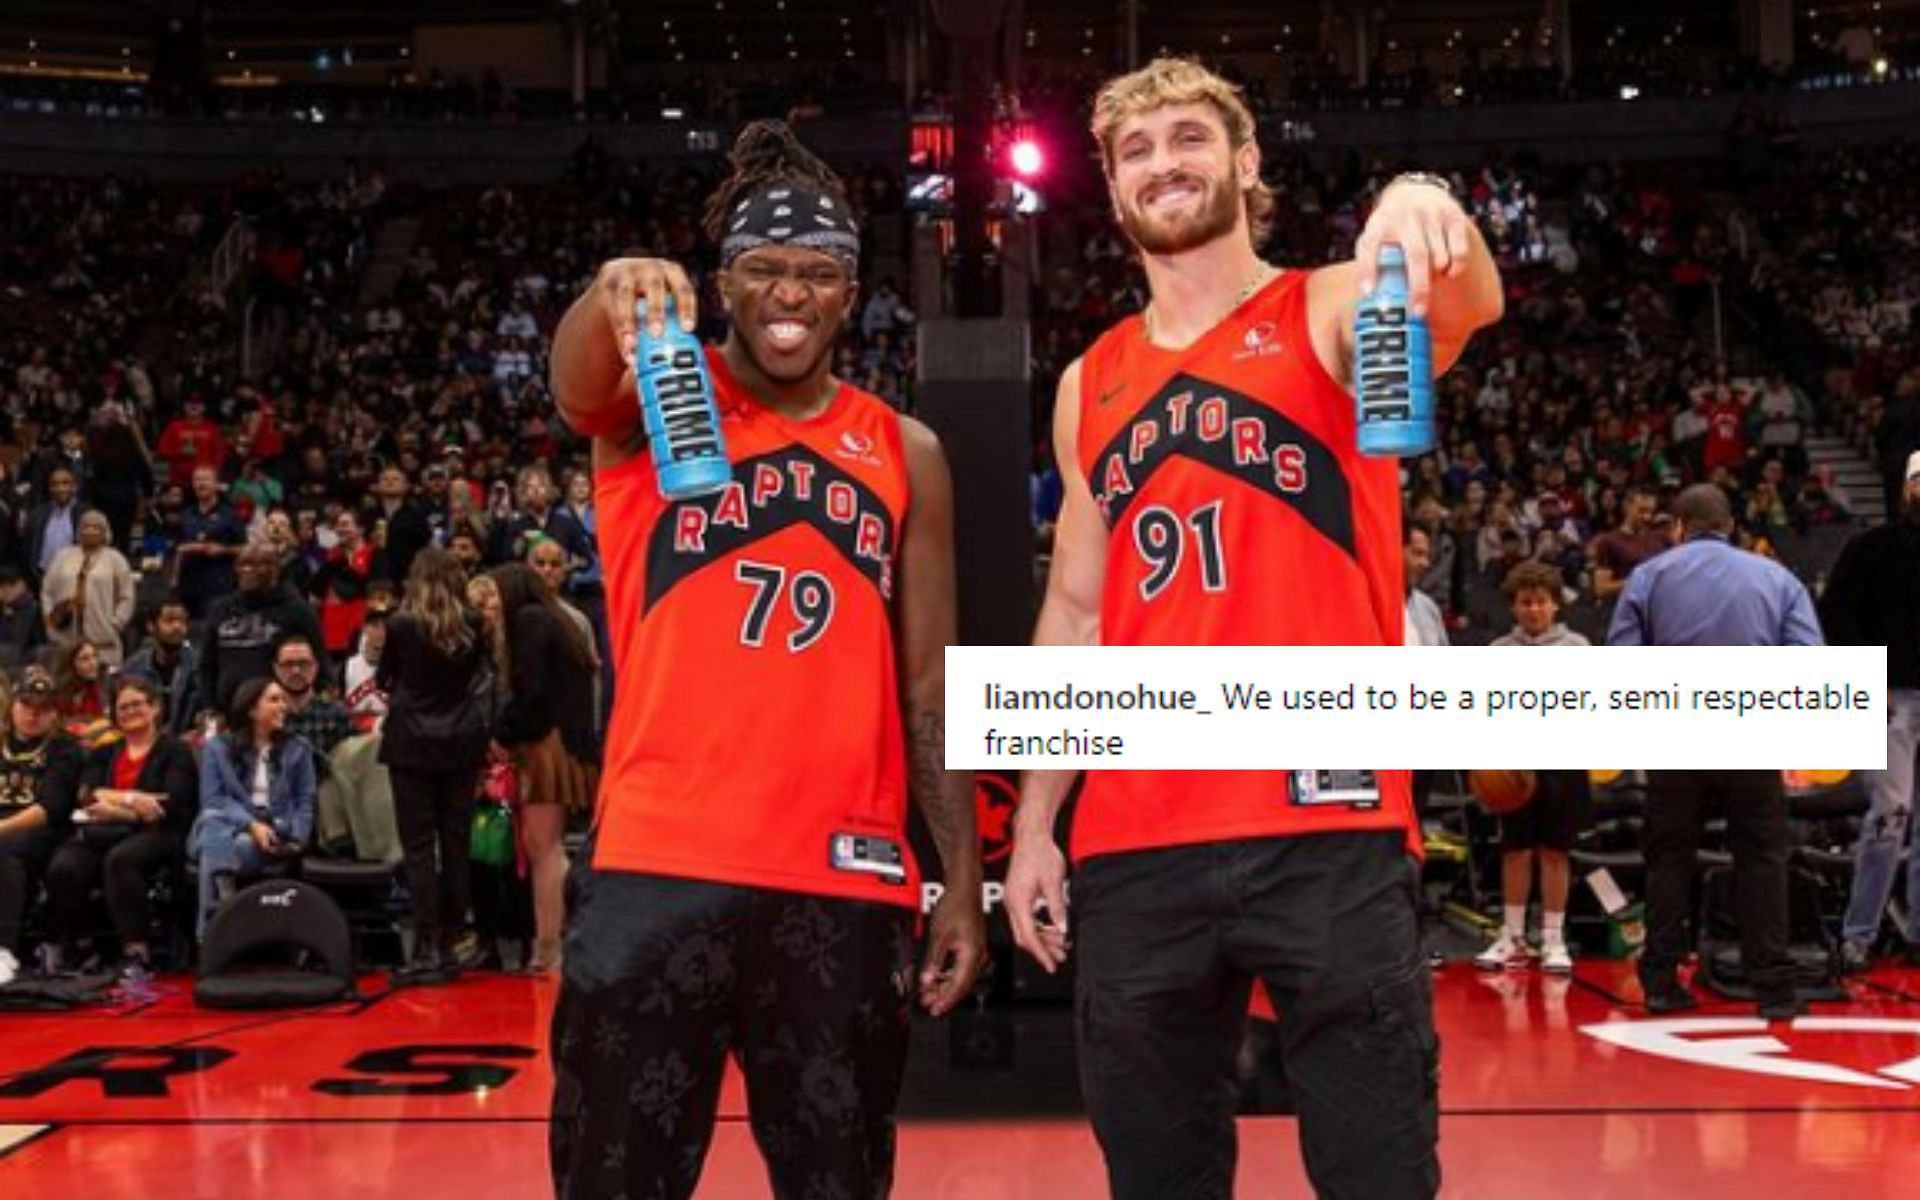 Fans torn after Logan Paul and KSI announce new PRIME partnership with the Toronto Raptors [Image courtesy: @raptors and @ksi - Instagram]